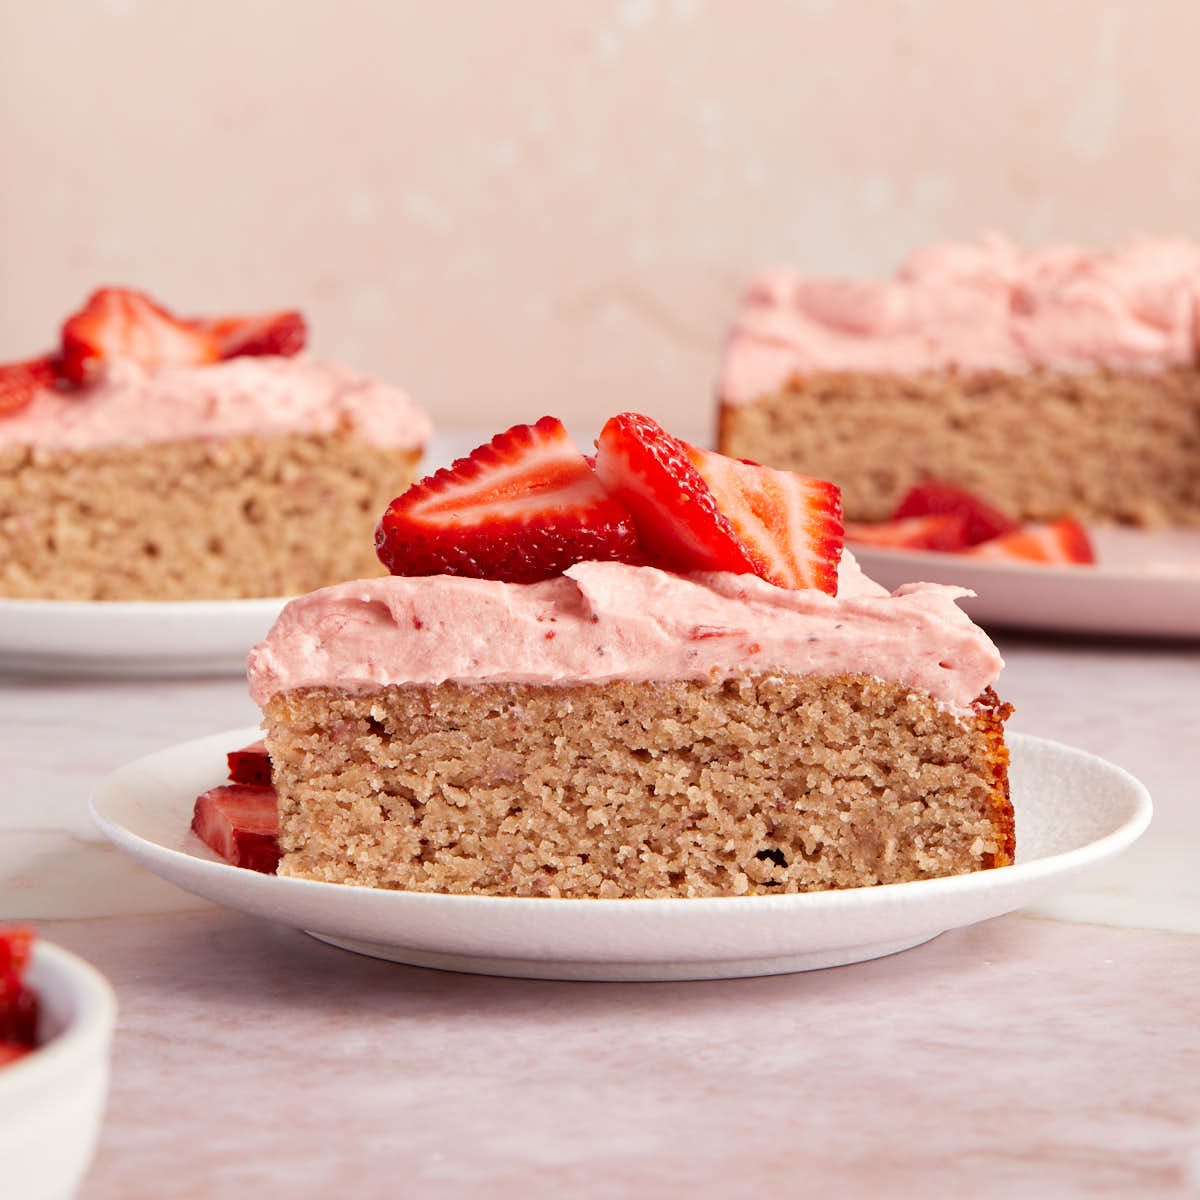 Almond Flour Cake with Strawberry Jam Topping - Oh My Veggies